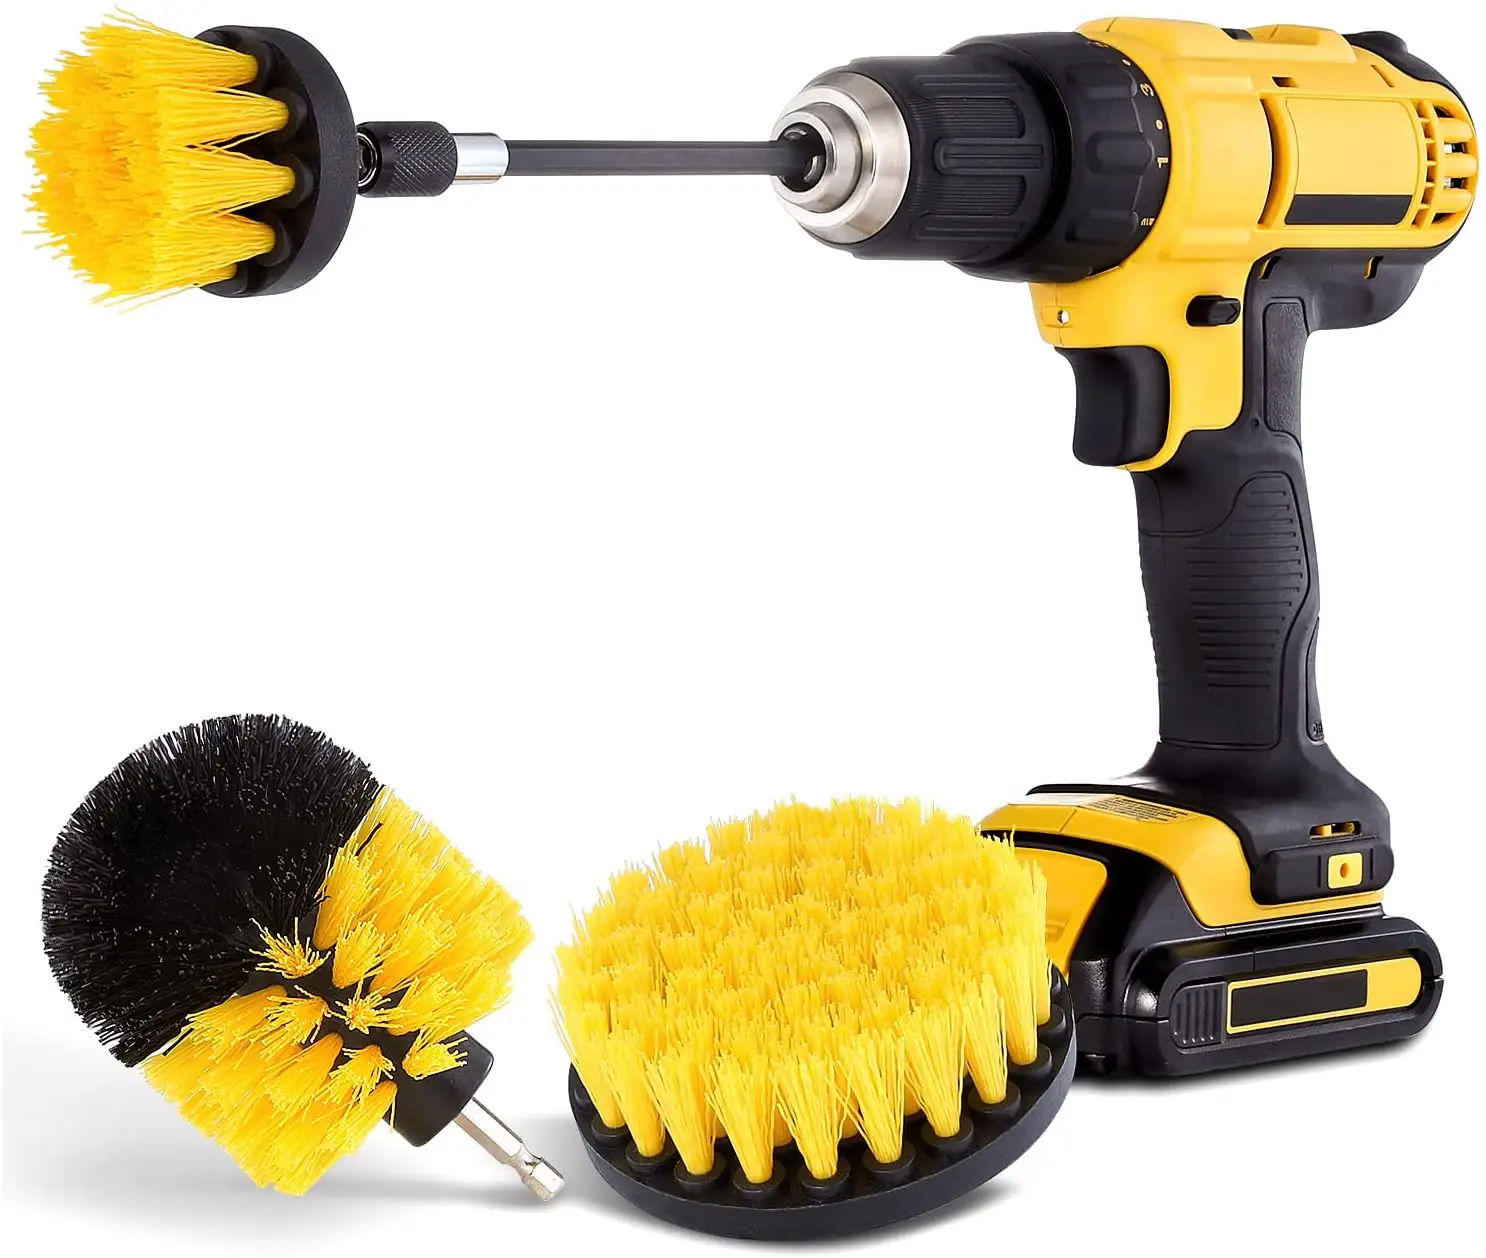 3 Pcs Drill cleaning Brush Attachment Set Kitchen and Car Power Scrubber Brush Cleaning Kit